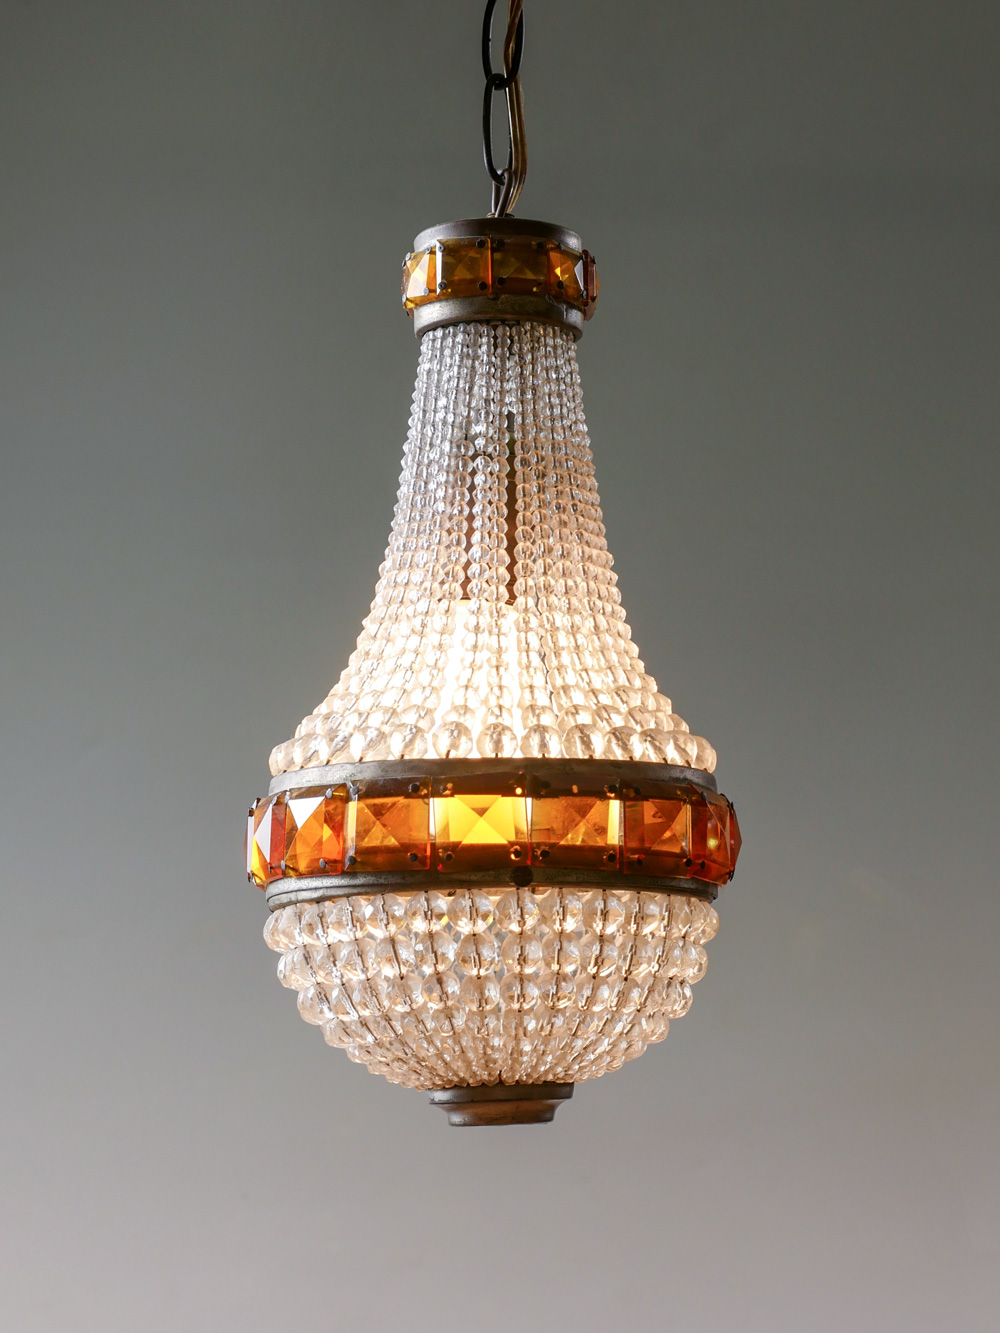 FRENCH STYLE CRYSTAL HALL LIGHT: